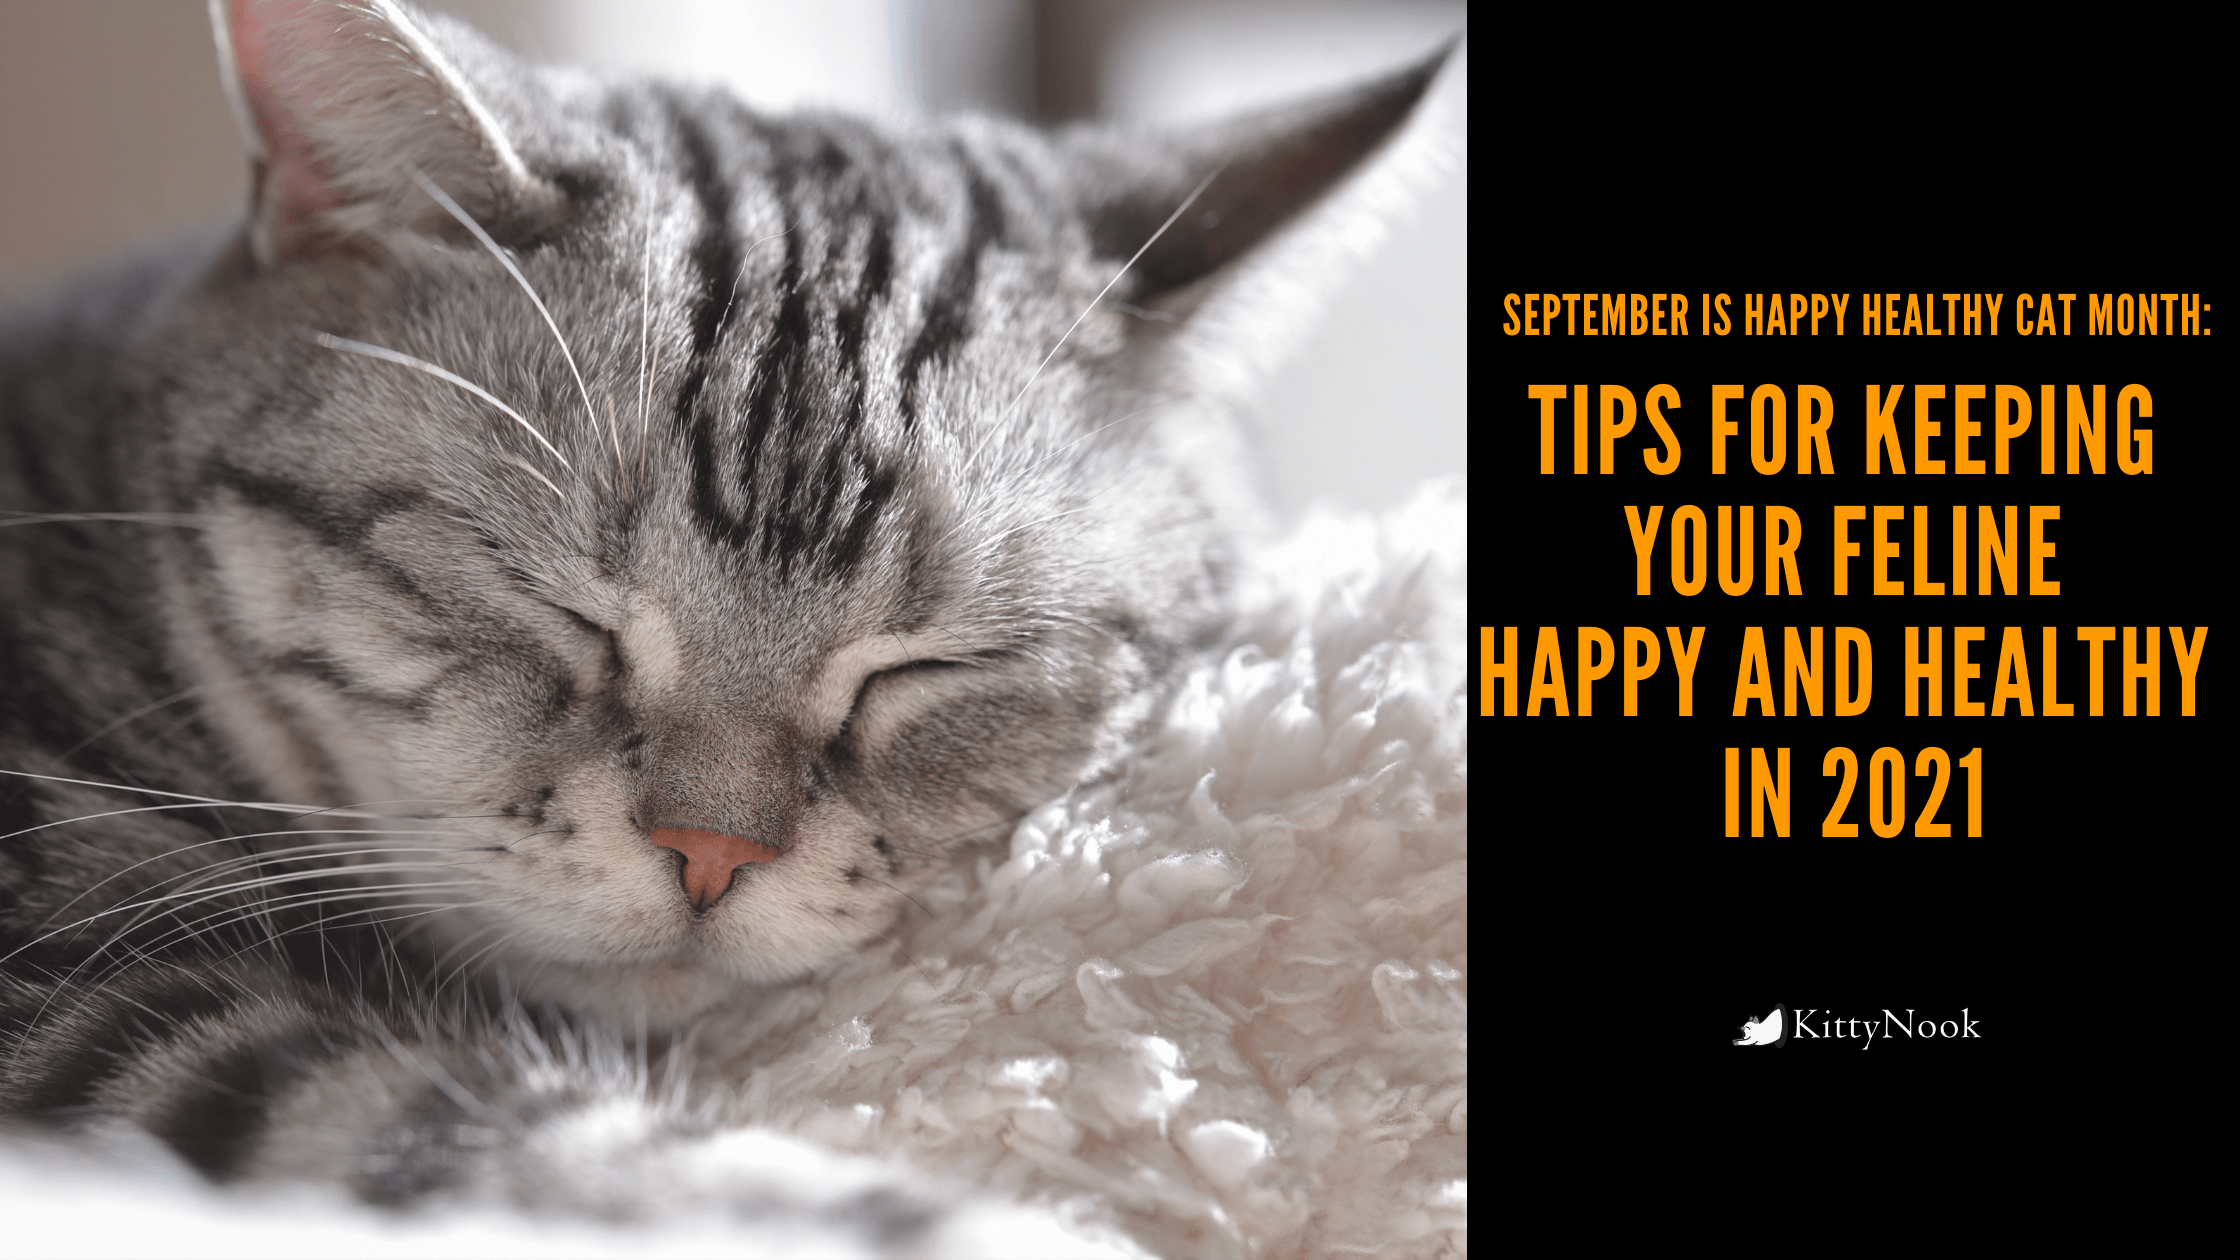 Tips for Keeping Your Feline Happy and Healthy in 2021 - KittyNook